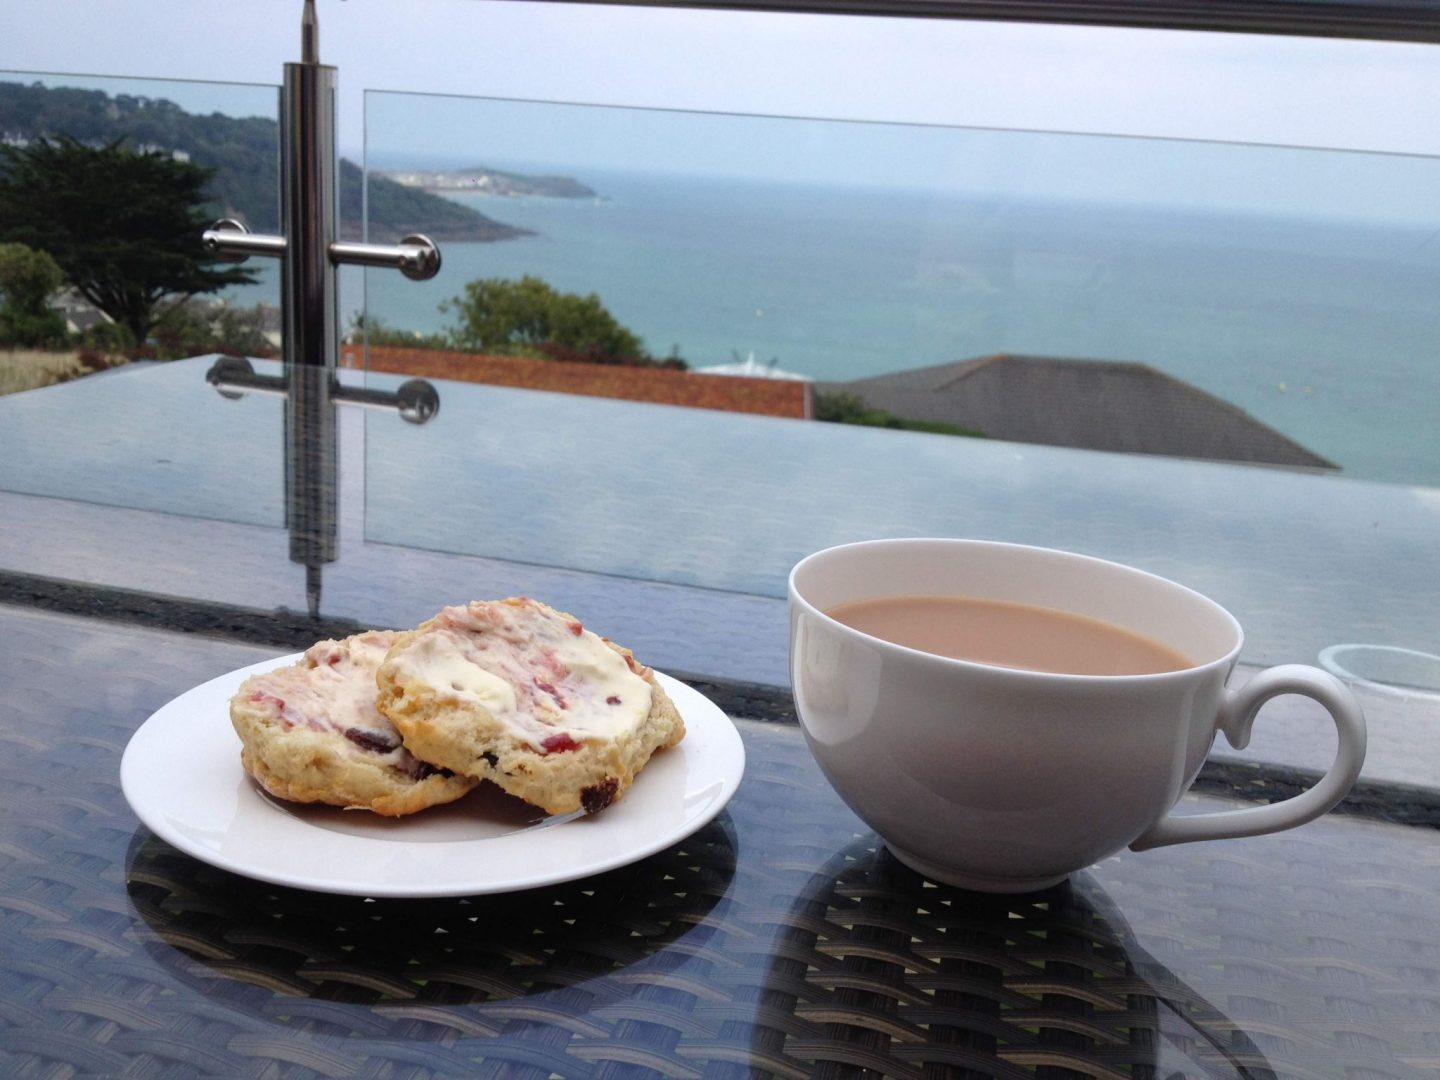 Cornish cream tea and scones with a view of St Ives, Cornwall